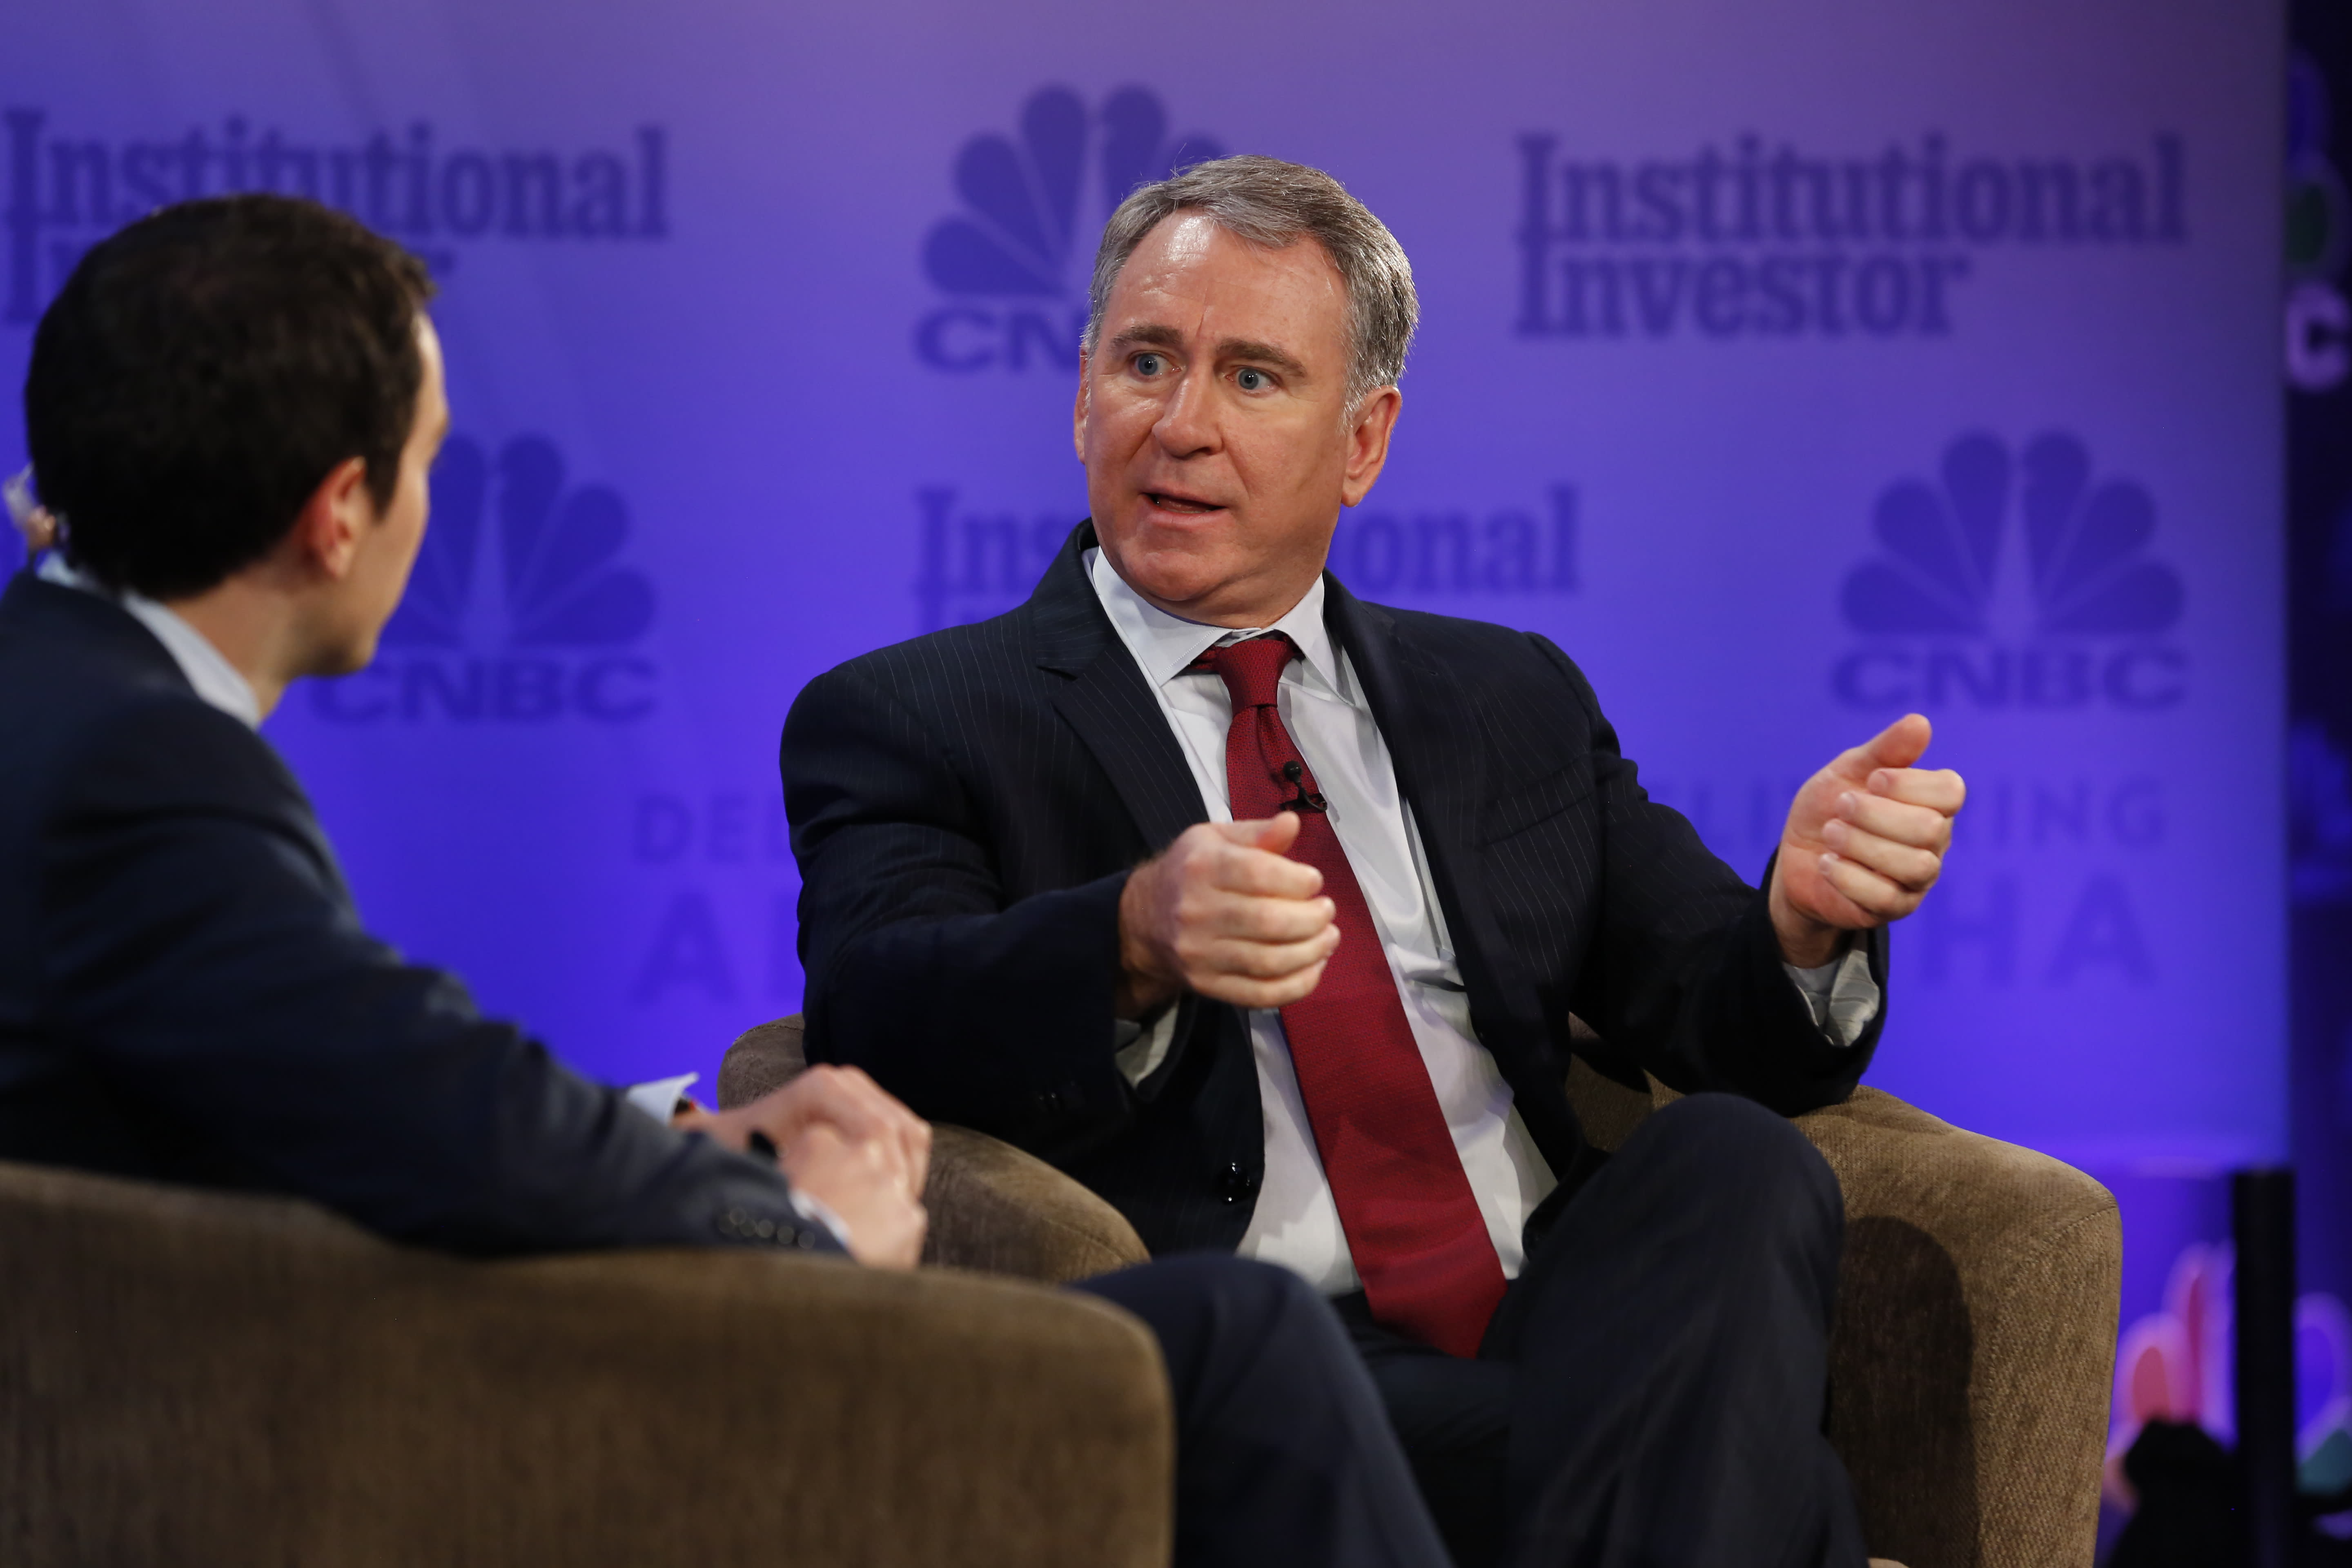 Citadel billionaire Ken Griffin defends Melvin stake against 'an insane conspiracy theory'